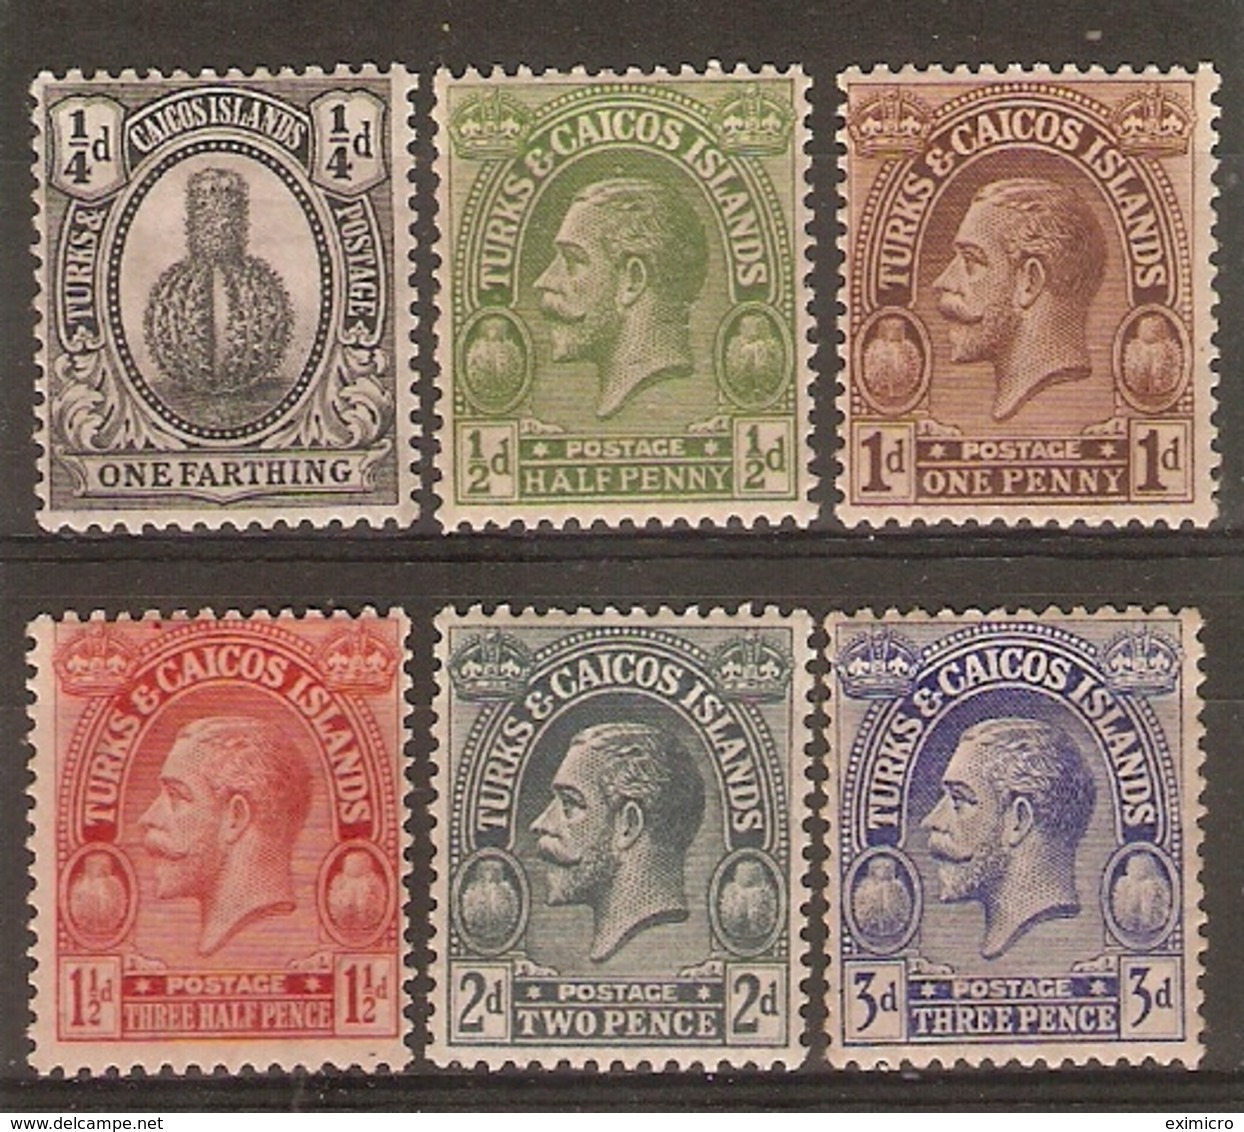 TURKS & CAICOS IS 1922 SET TO 2d + 3d SG 162/166 & 168 MOUNTED MINT Cat £17.50 - Turcas Y Caicos